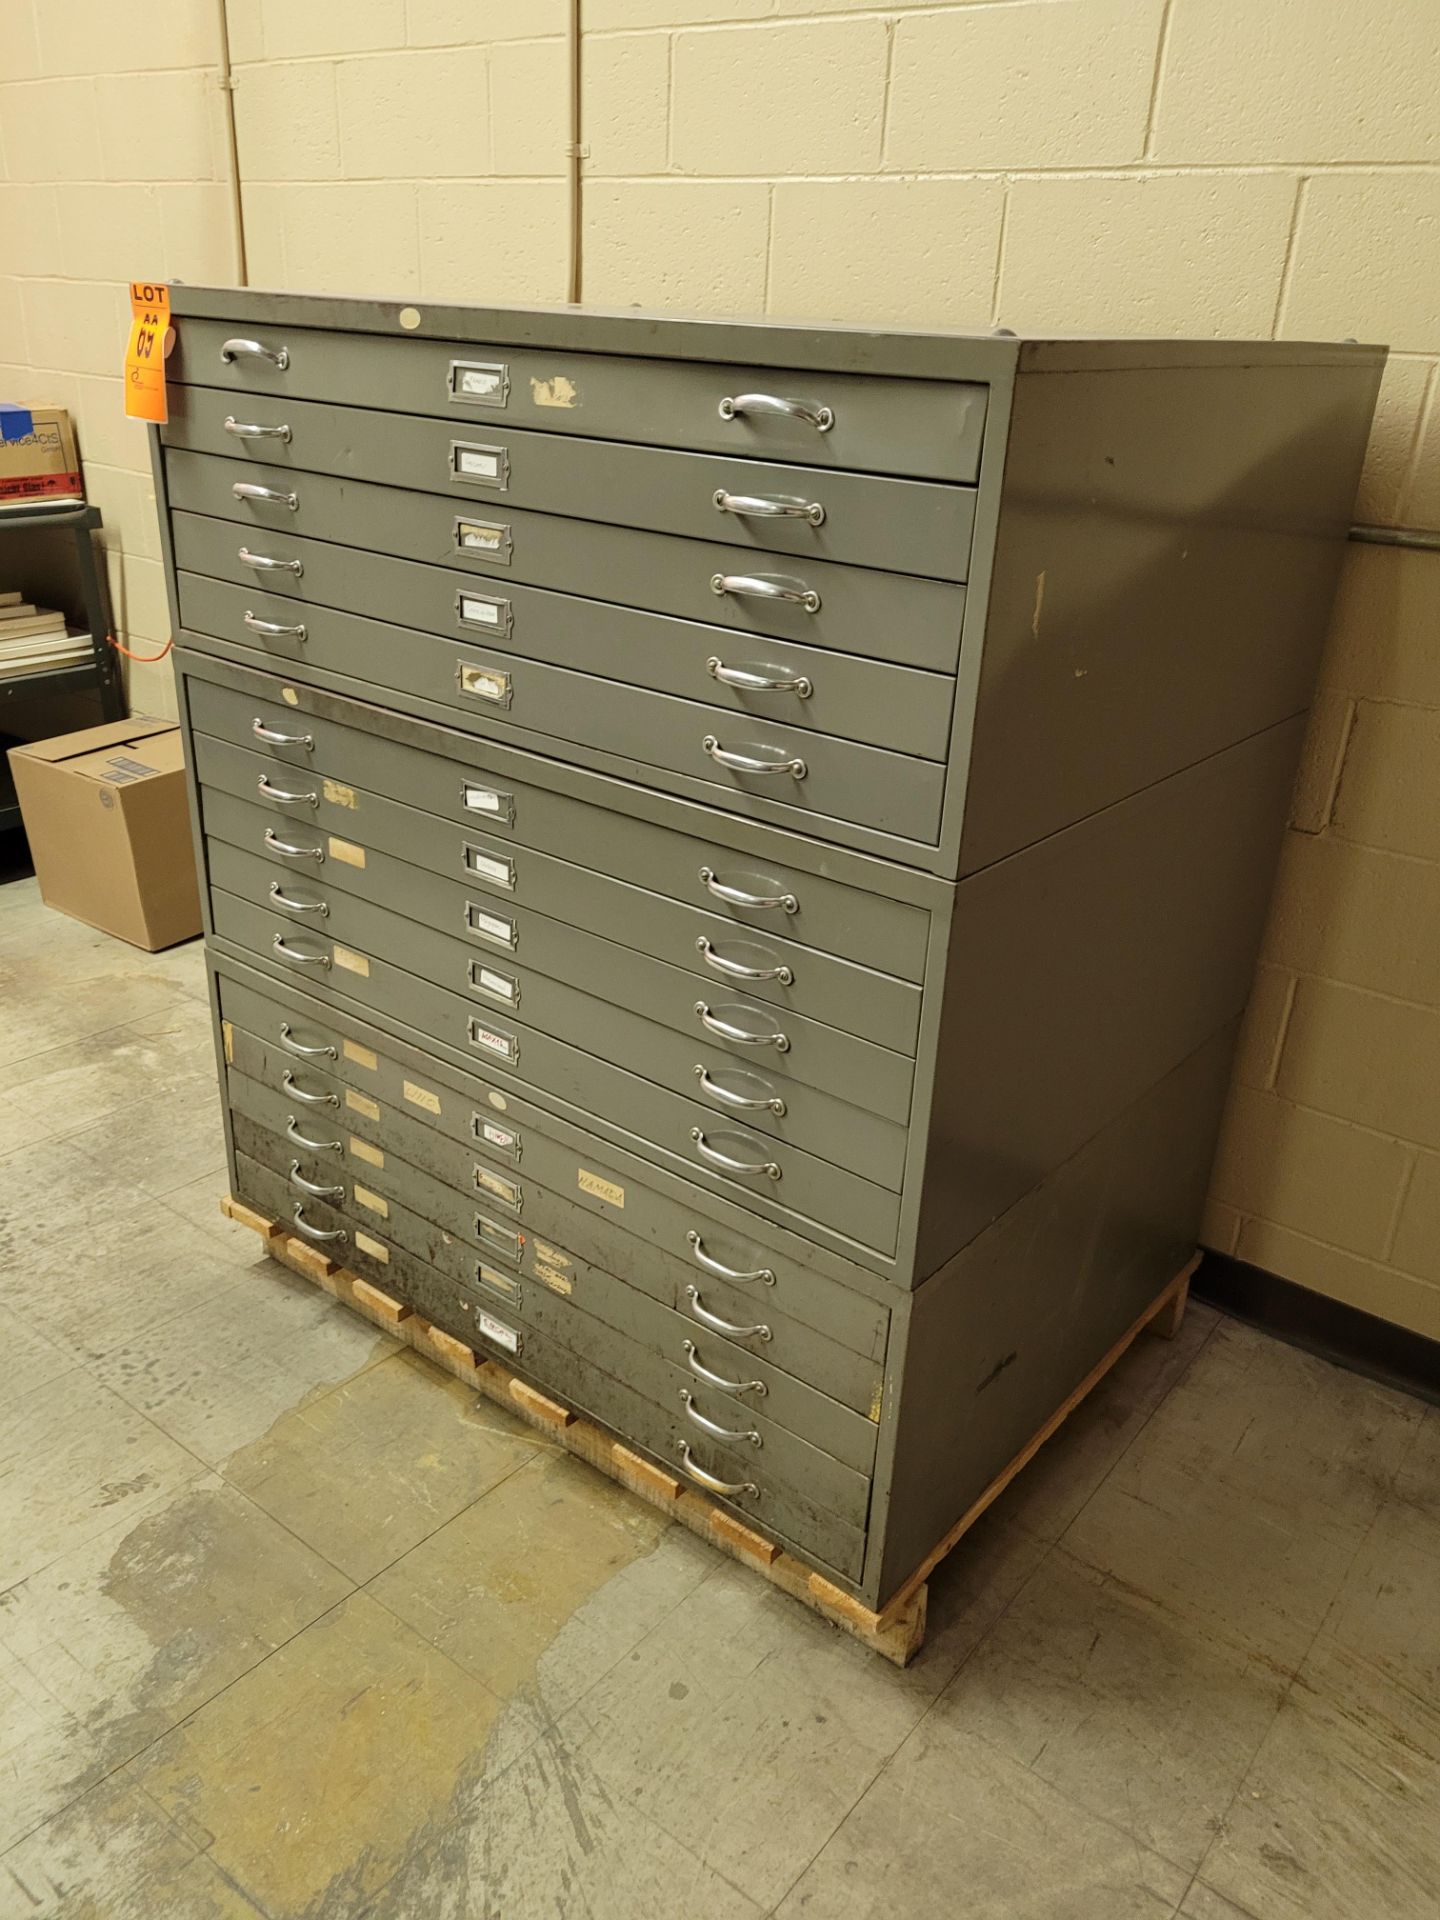 Lot of (3) Heavy-Duty Steel 5-Drawer, 10-Handle Drafting Storage Units, on pallet. - Image 2 of 4